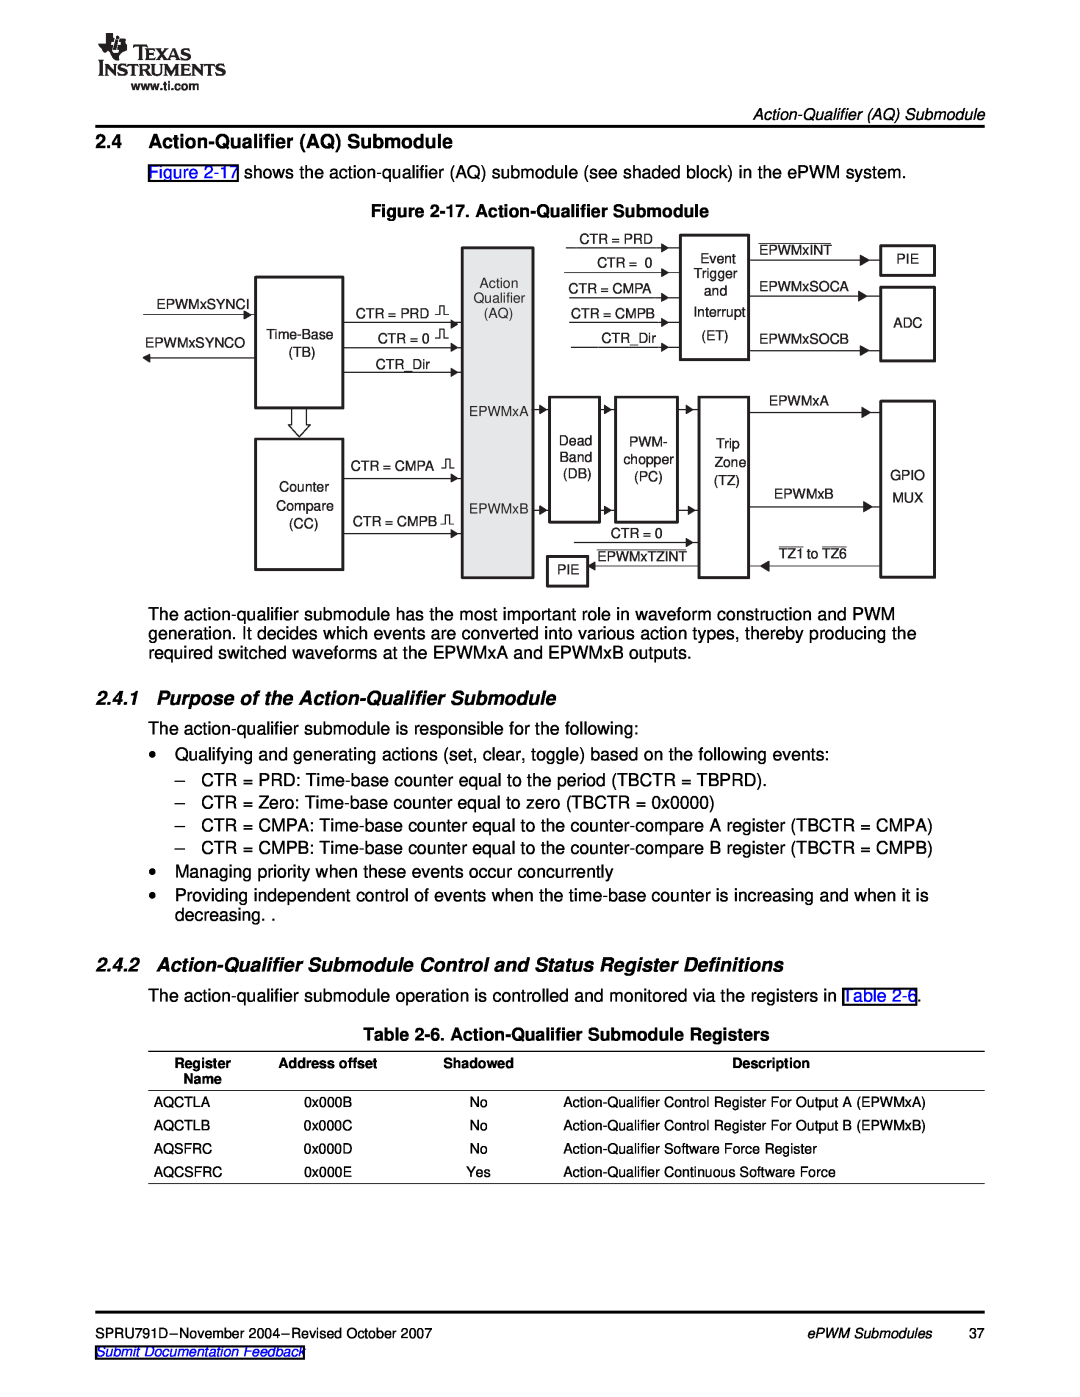 Texas Instruments 28xxx, TMS320x28xx manual Action-Qualifier AQ Submodule, Purpose of the Action-Qualifier Submodule 